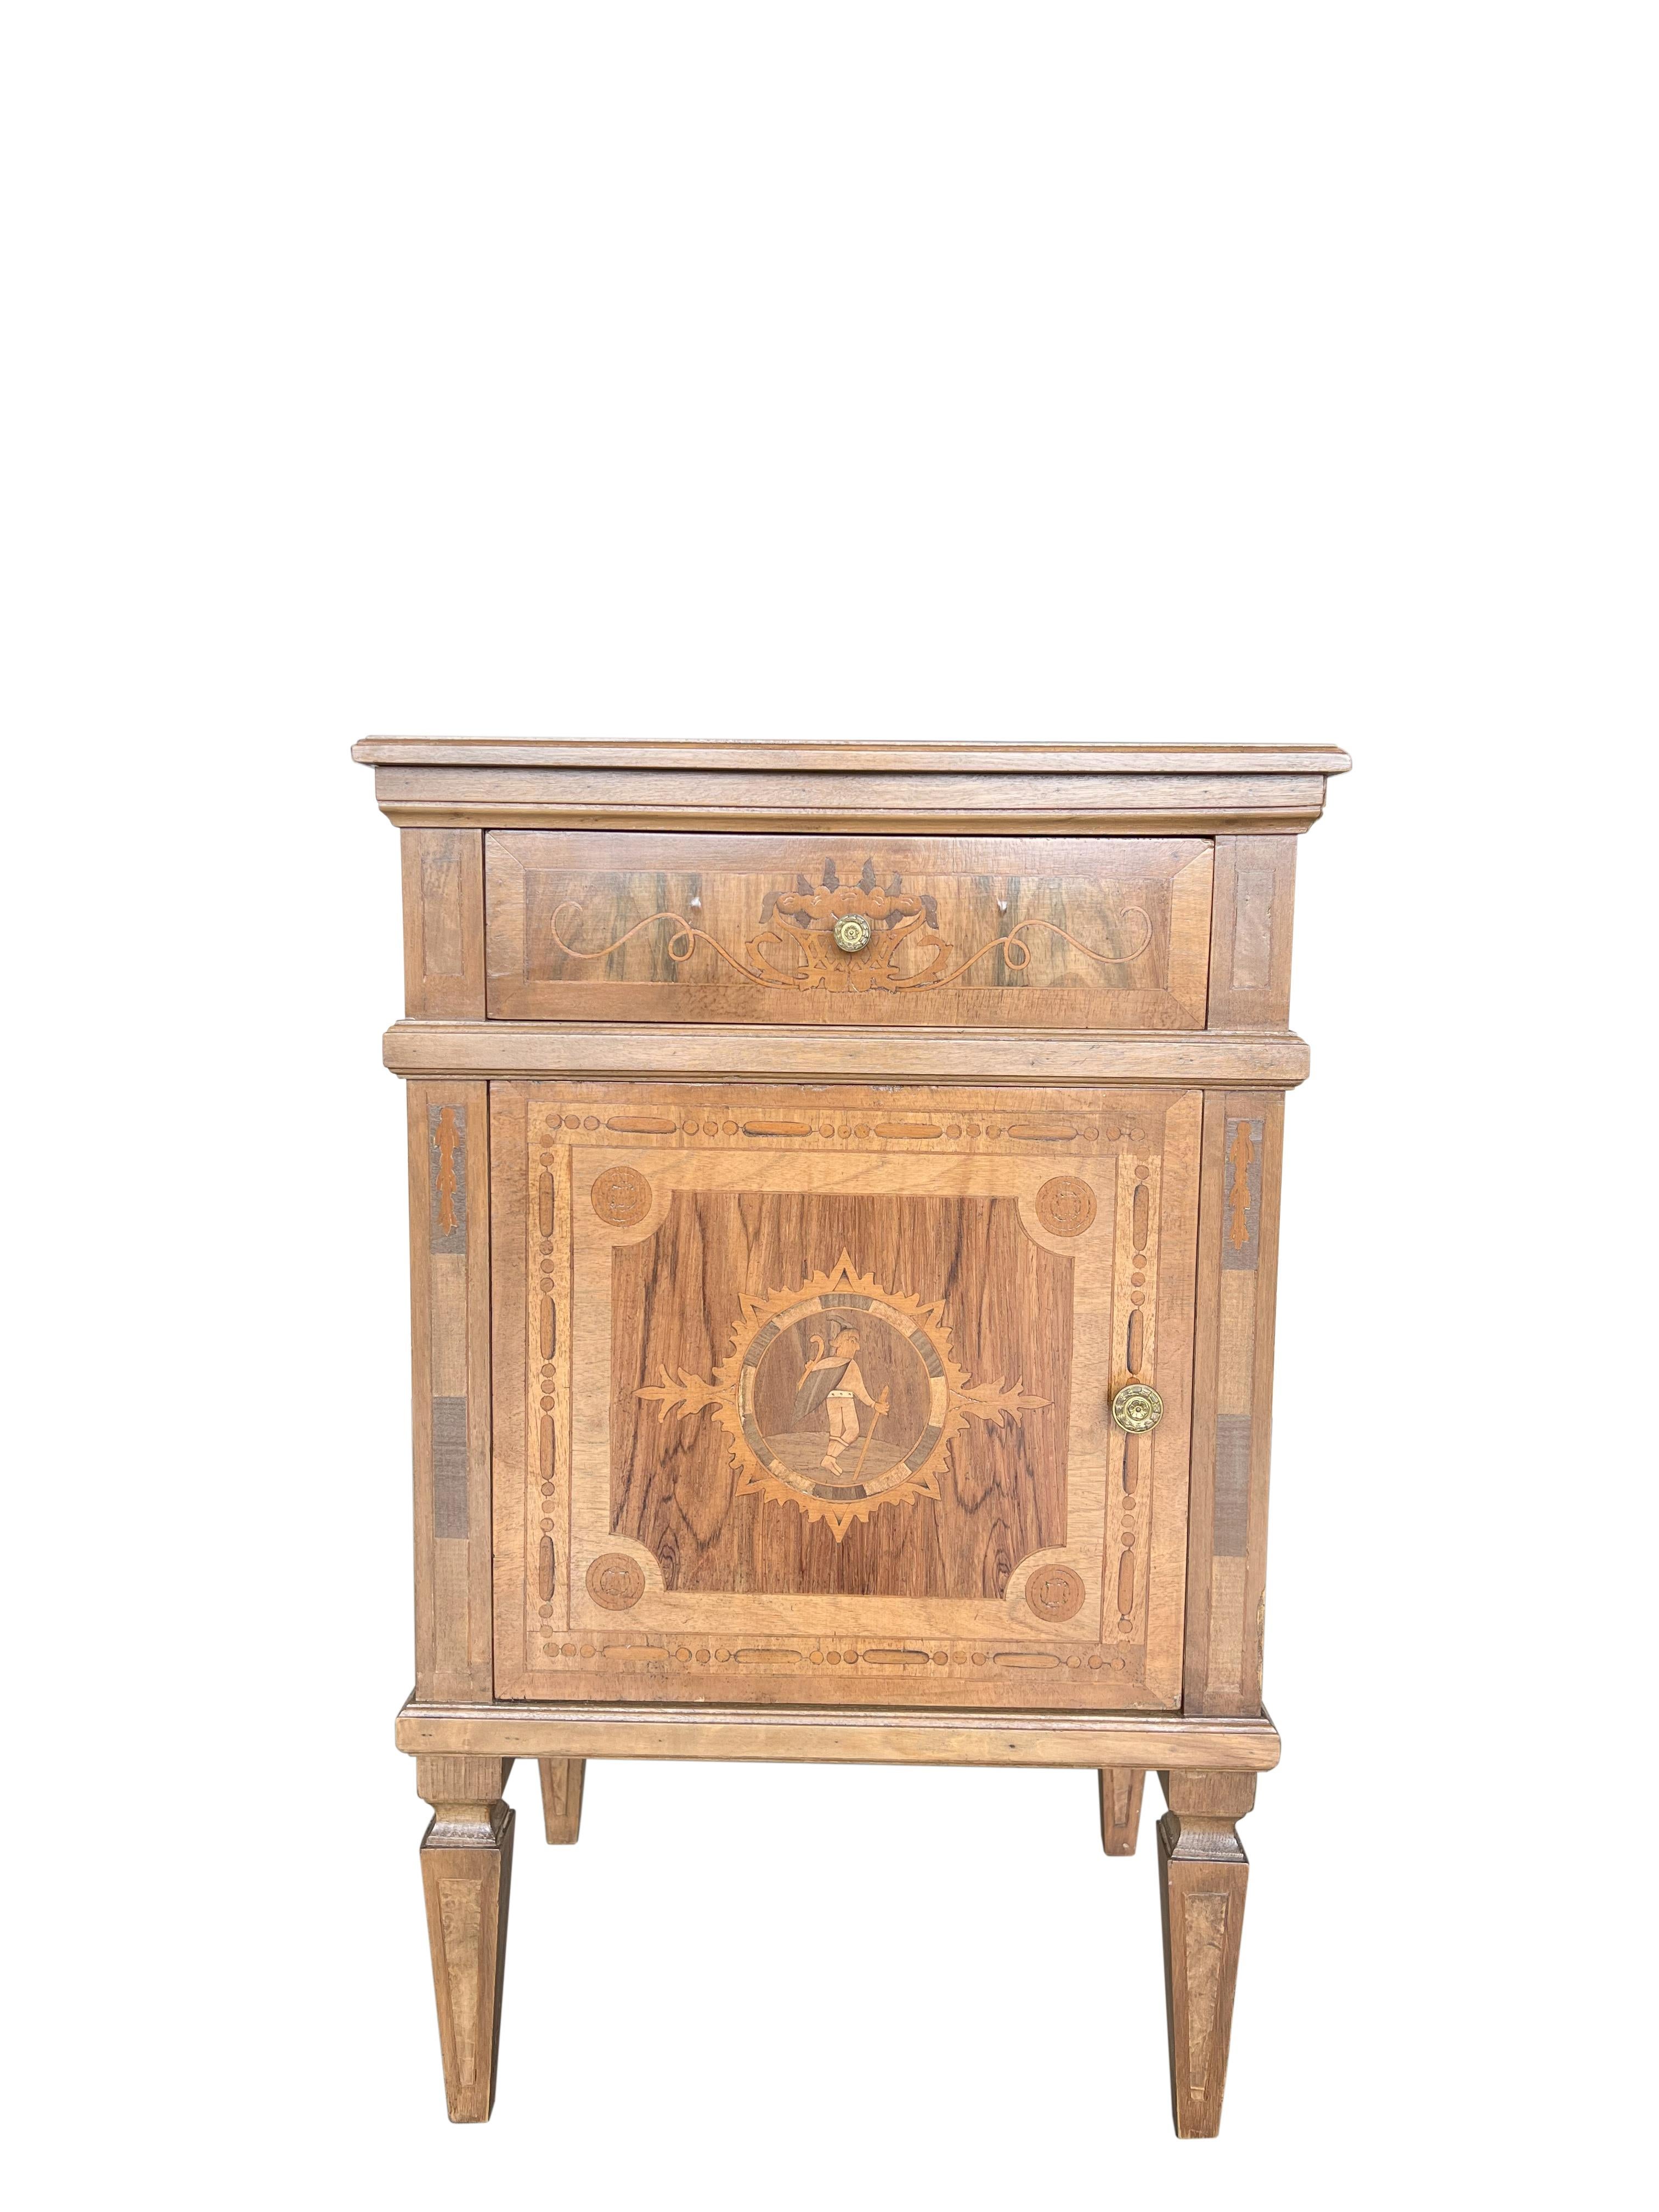 Hand-Crafted Louis XVI Style Tuscan Italian Walnut Nightstand Pair with Inlay Marquetry   For Sale